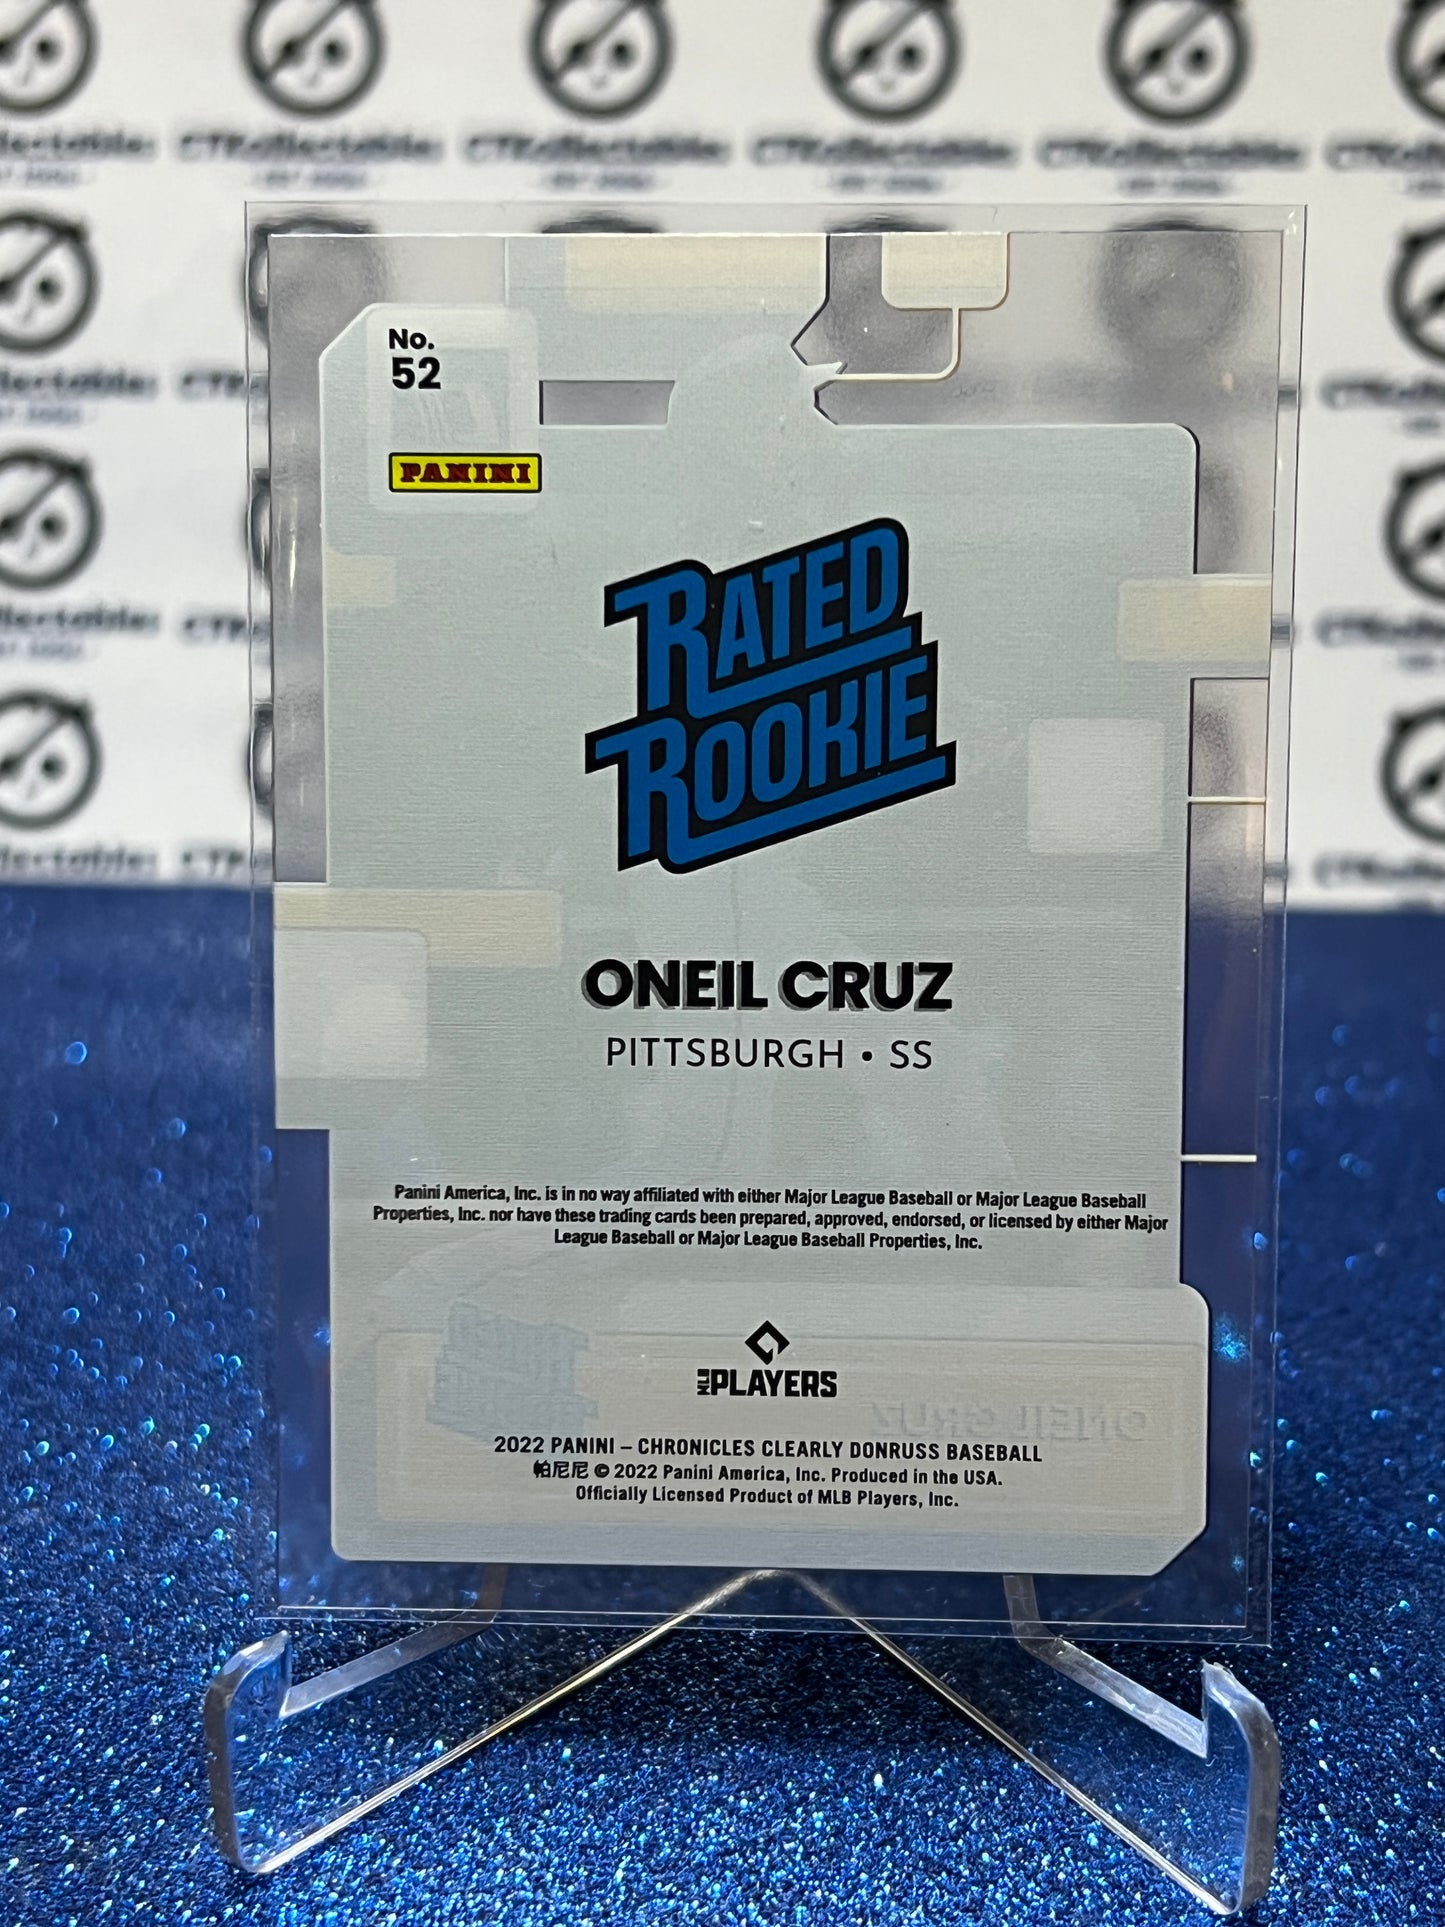 2022 PANINI CHRONICLES CLEARLY DONRUSS ONEIL CRUZ # 52 RATED ROOKIE PITTSBURGH PIRATES  BASEBALL CARD